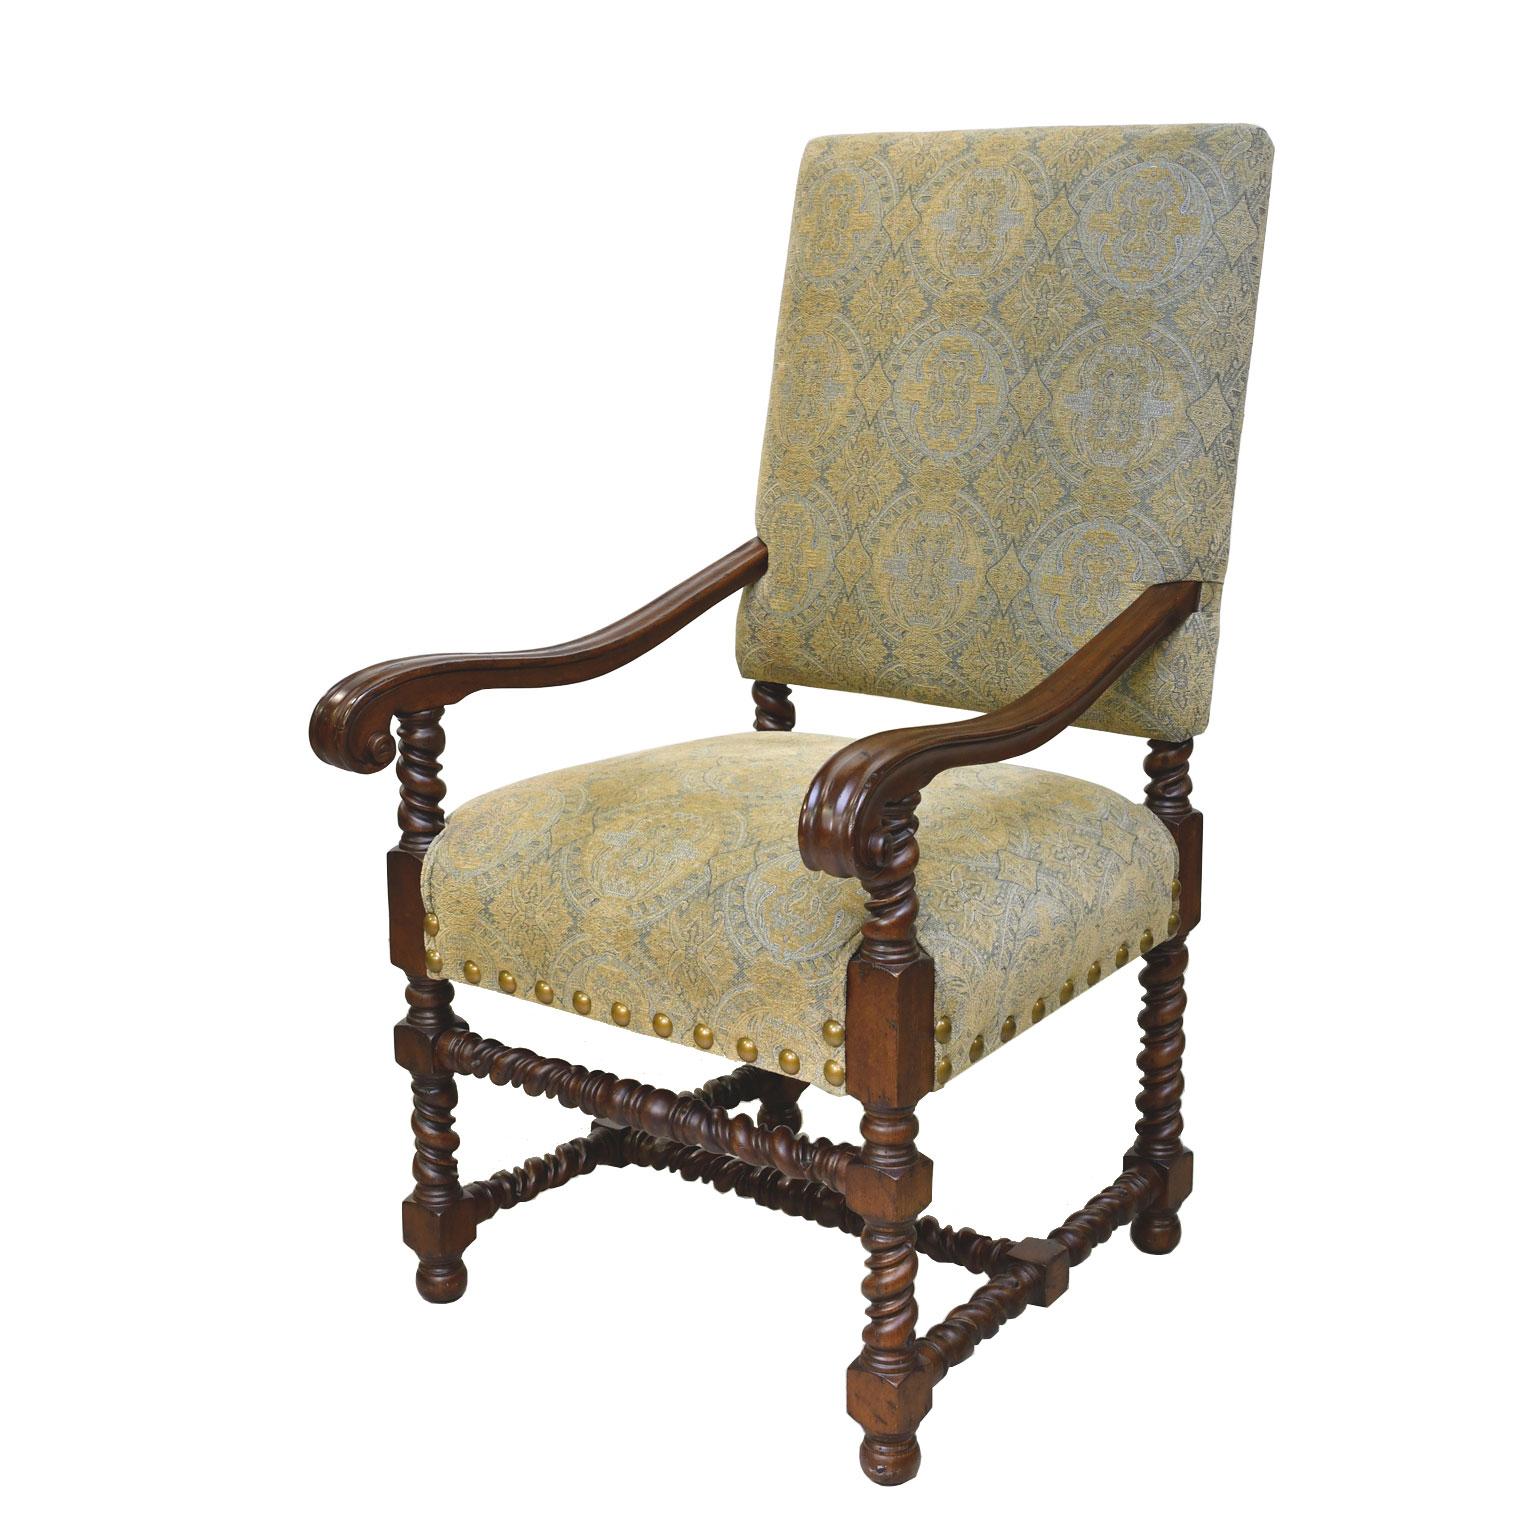 Set of Ten Upholstered Tudor-Style Dining Chairs with Turned Legs & Stretcher 3